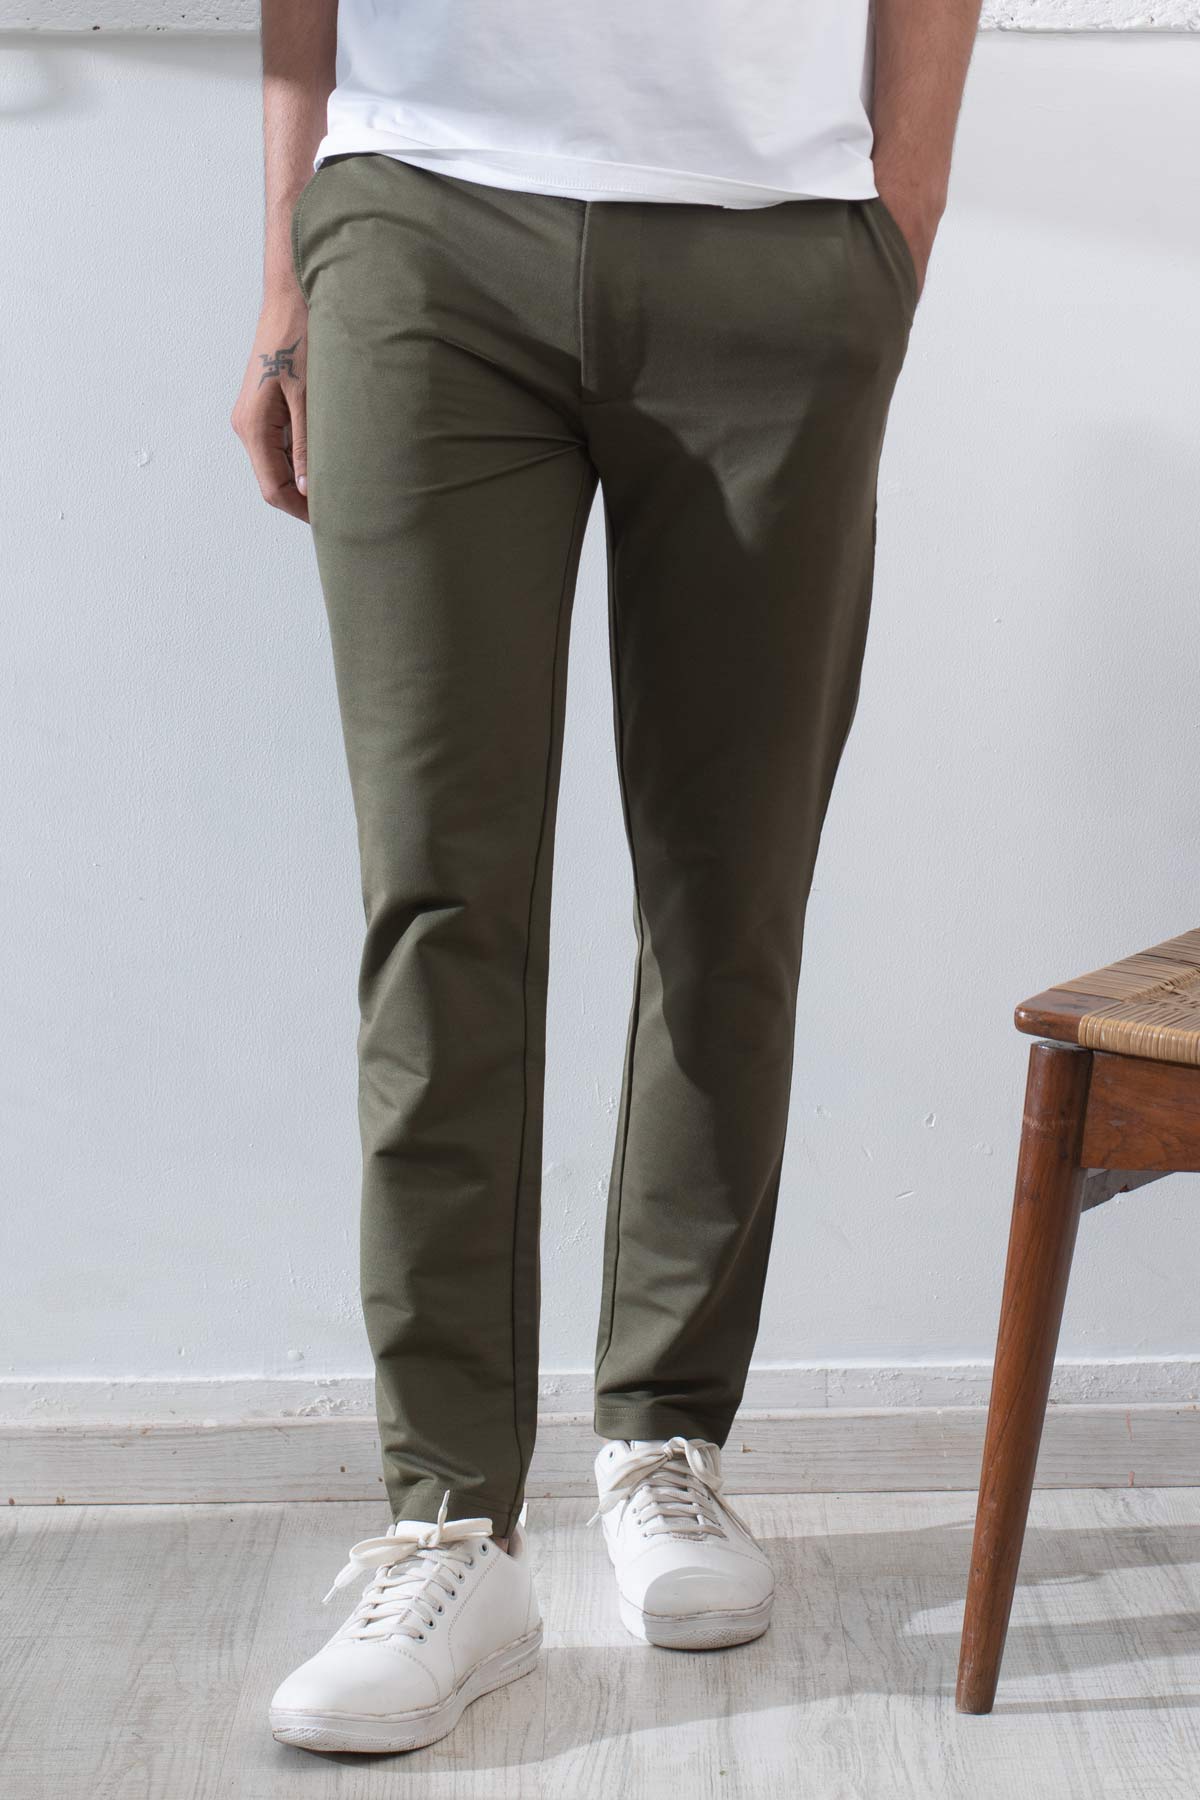 The Ivy Green Pant